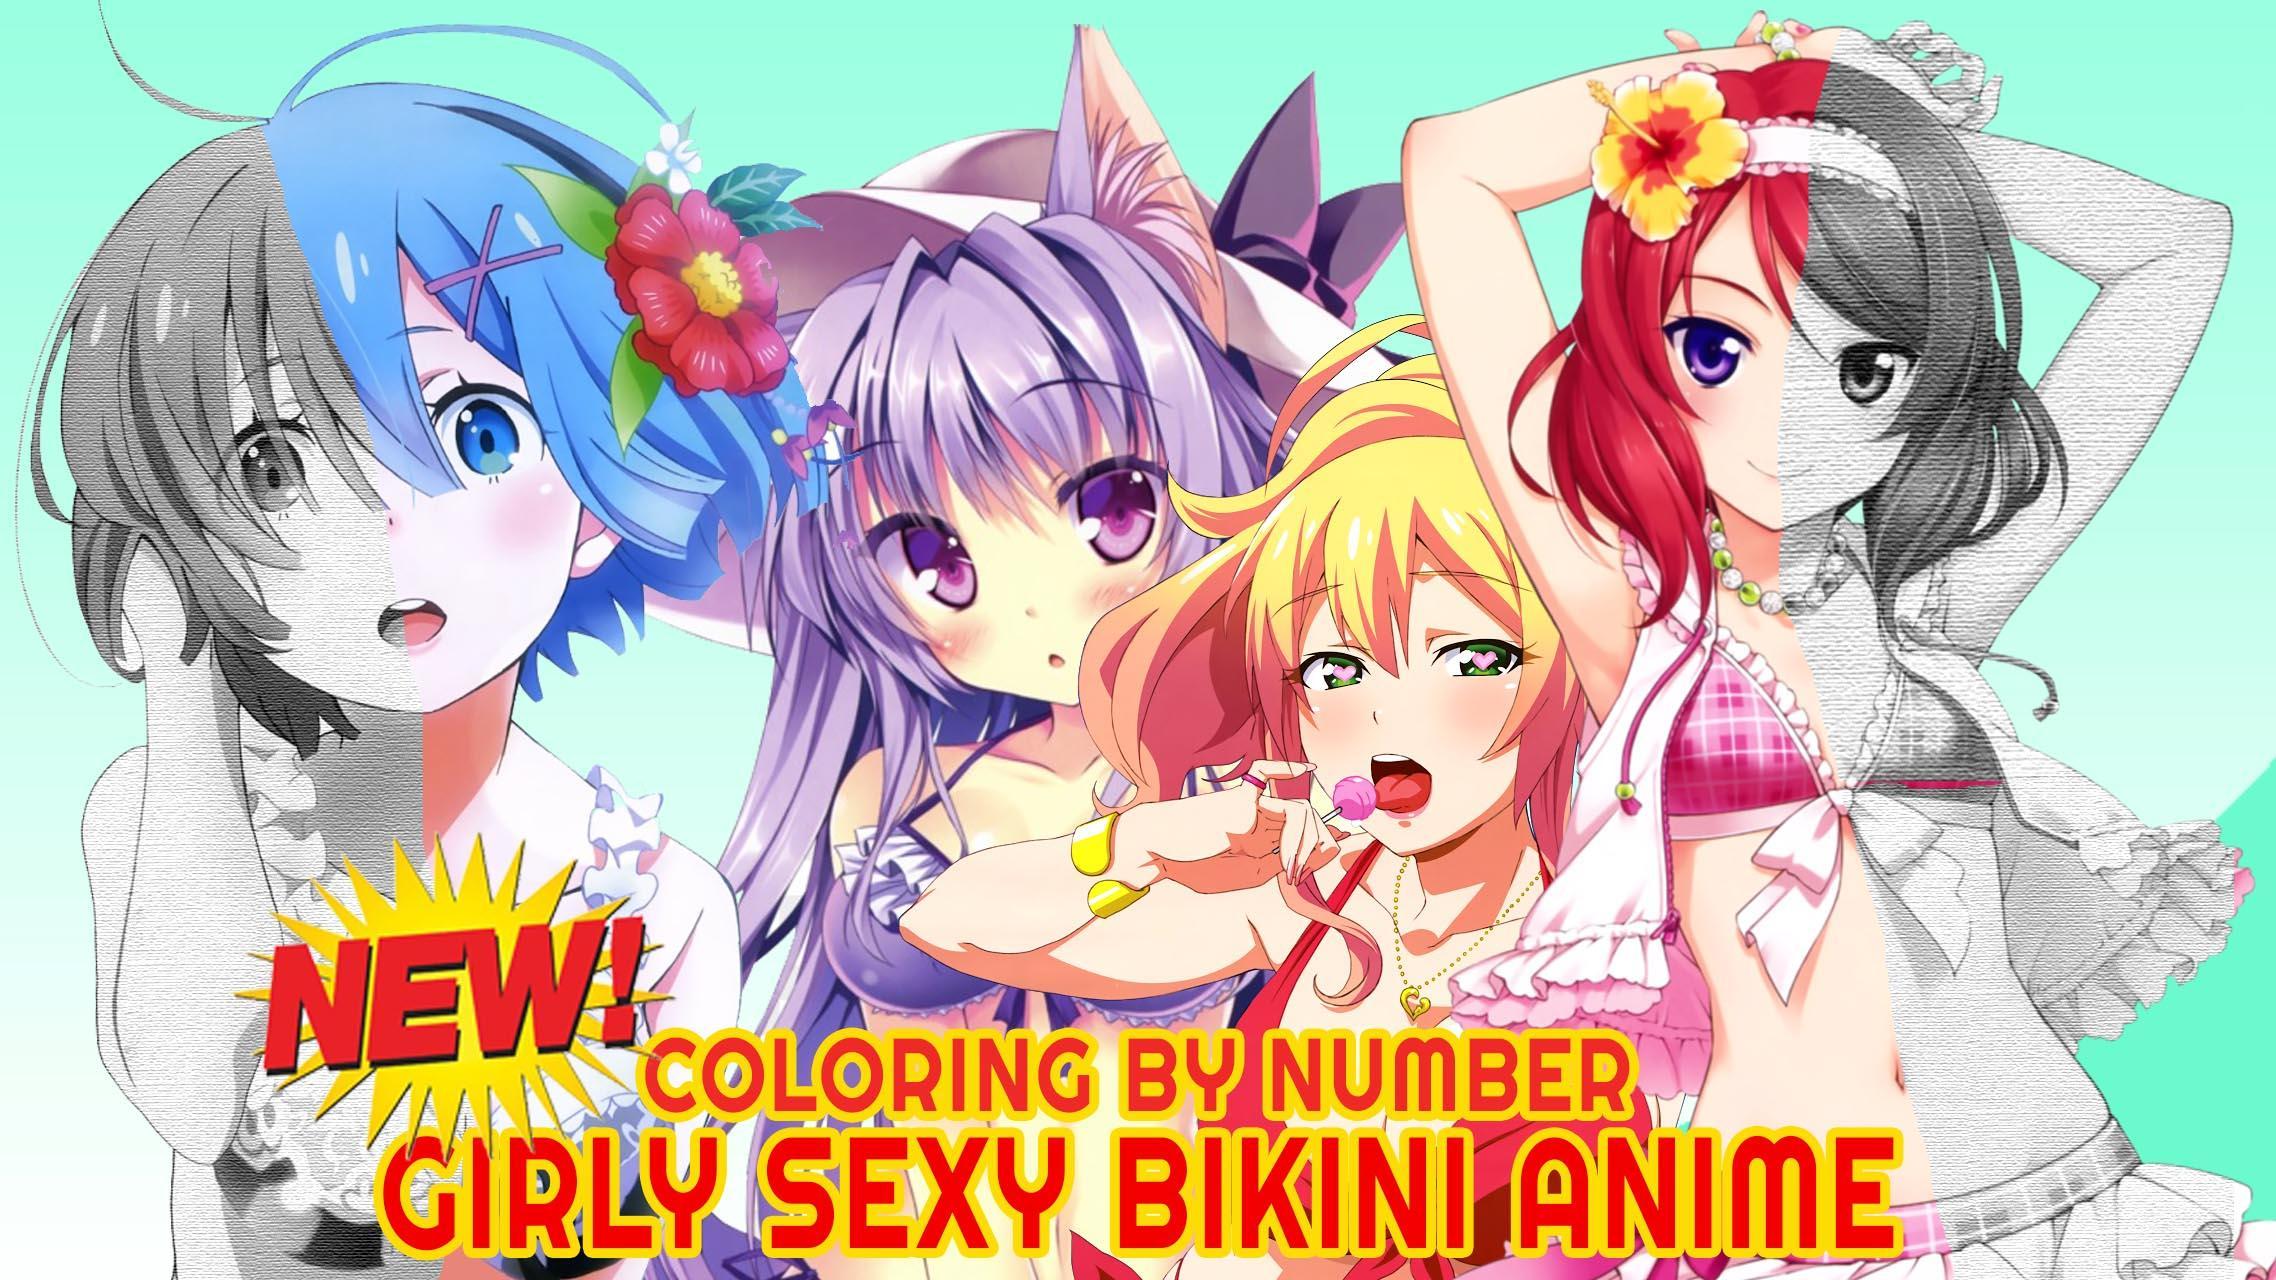 Girly Anime Sexy Bikini Color By Number For Adult for Android - APK Download